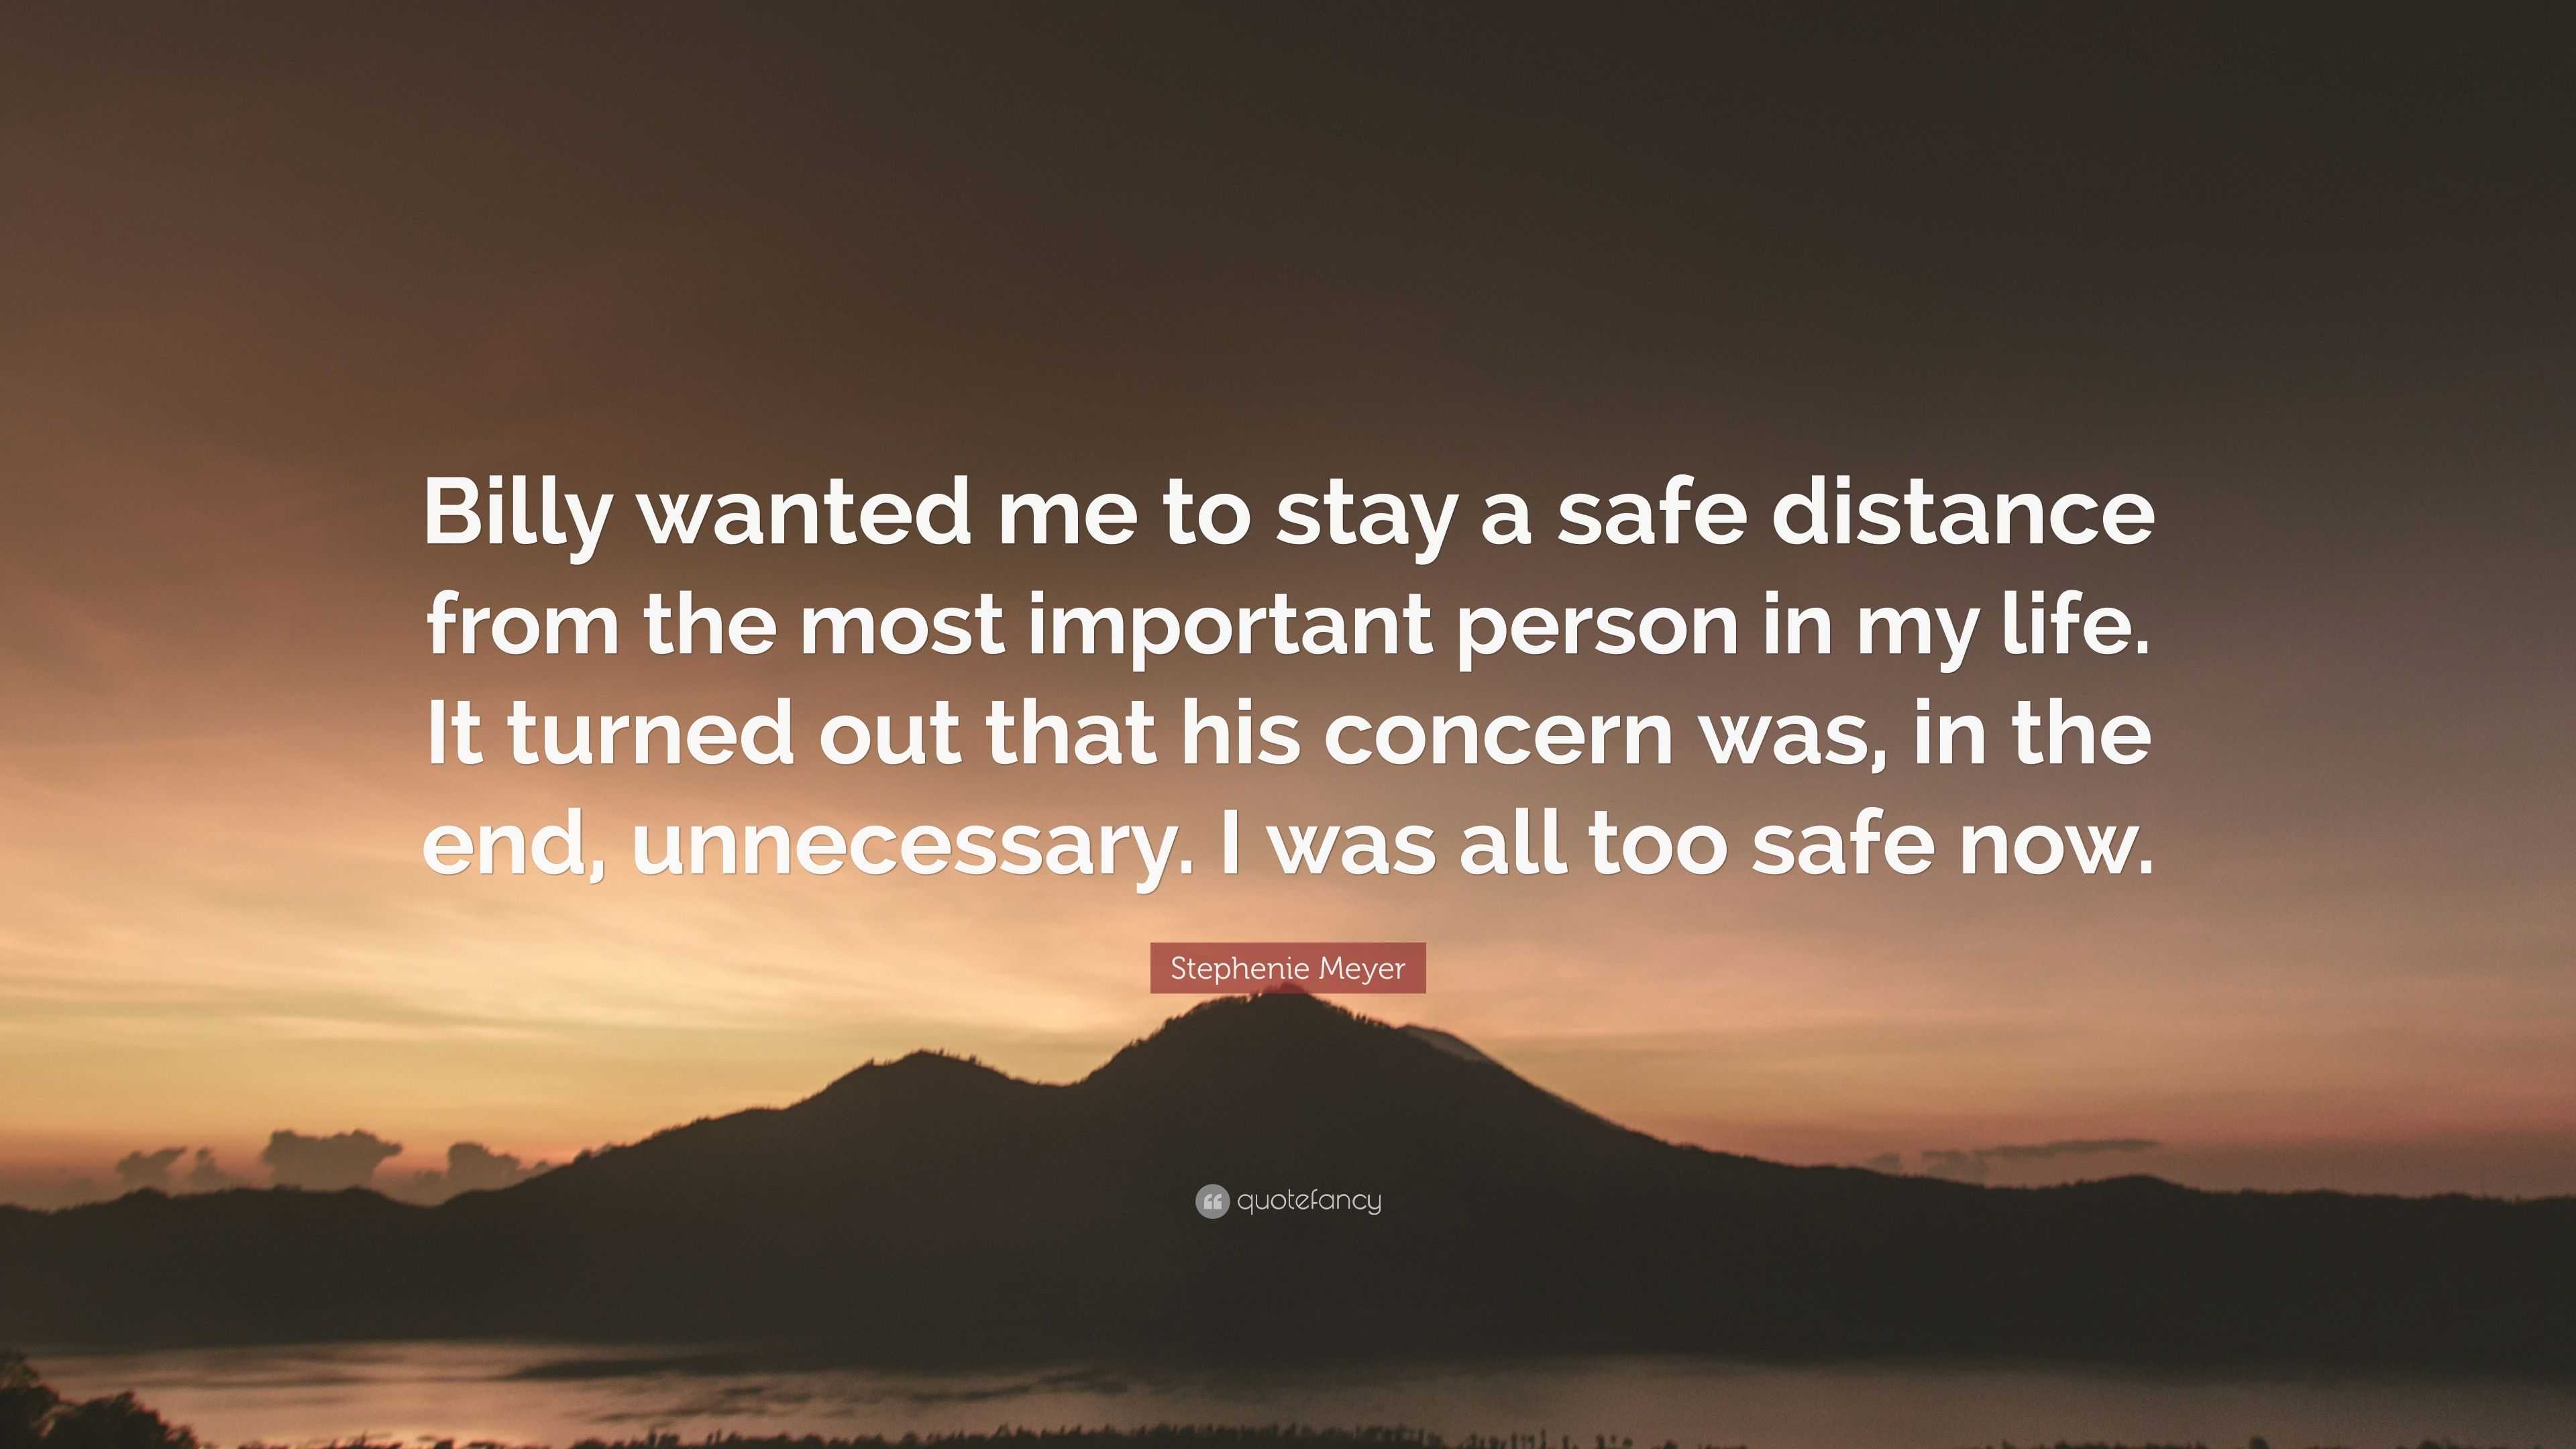 Stephenie Meyer Quote “Billy wanted me to stay a safe distance from the most